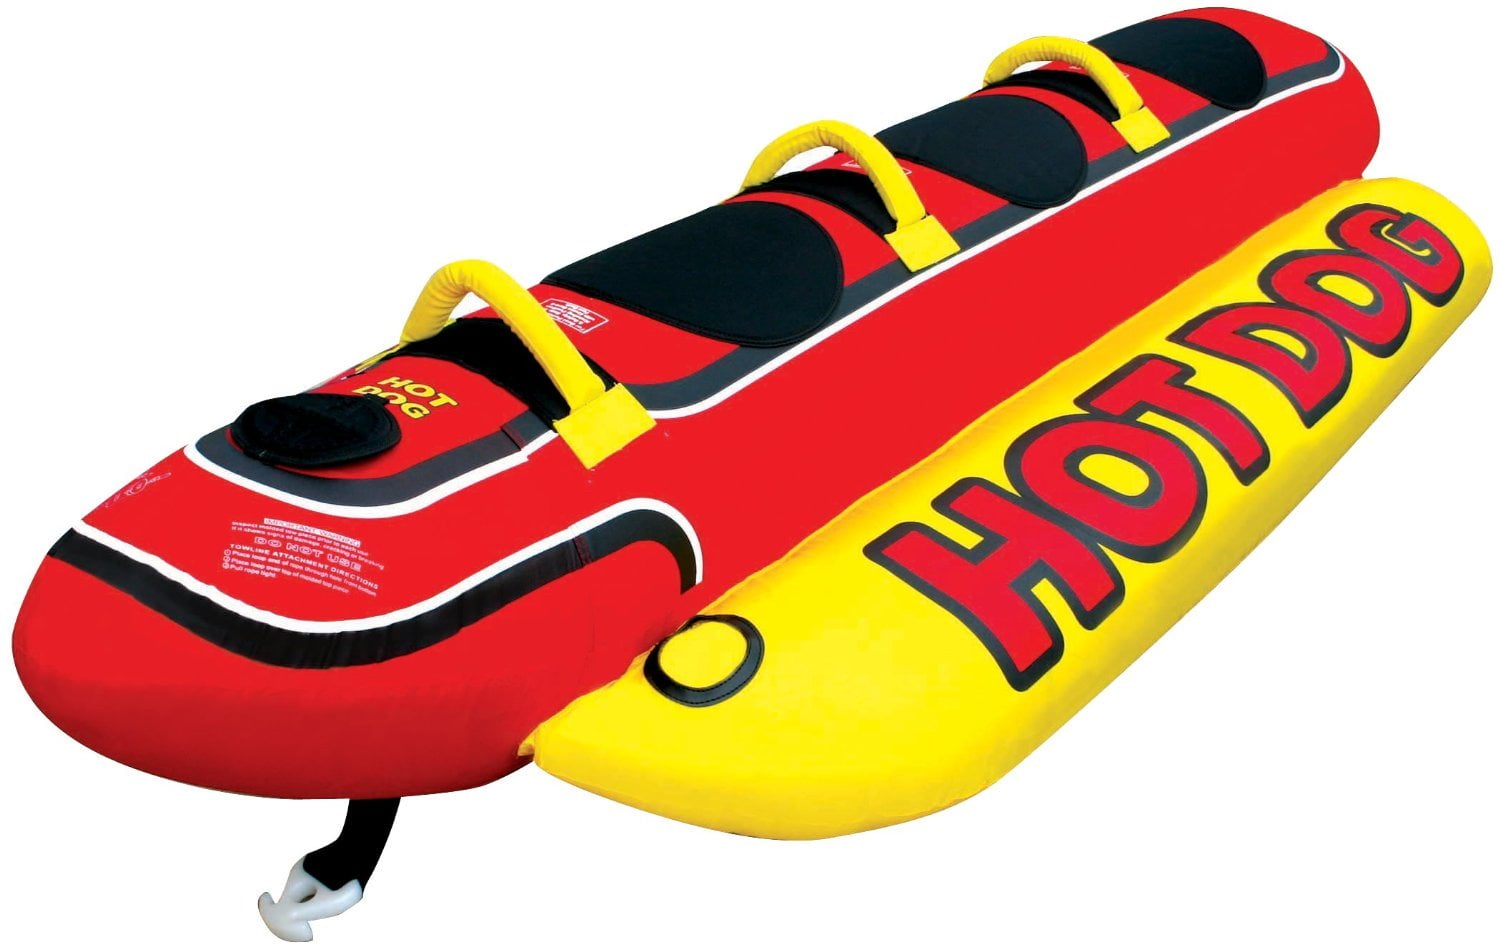 RAVE Sports Inflatable 3 Person Rider Towable Boat Lake Water Tube Razor Raft 